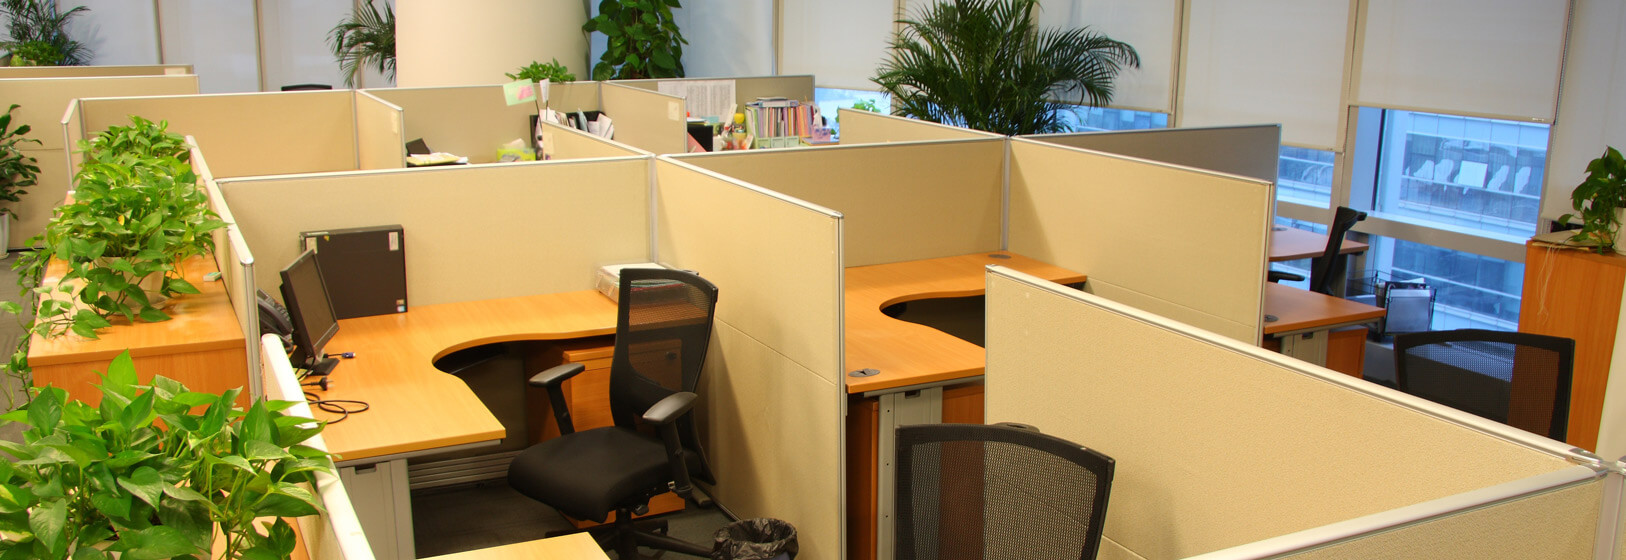 BSOSC | Cubicles & Panel Systems | Charleston Office Furniture